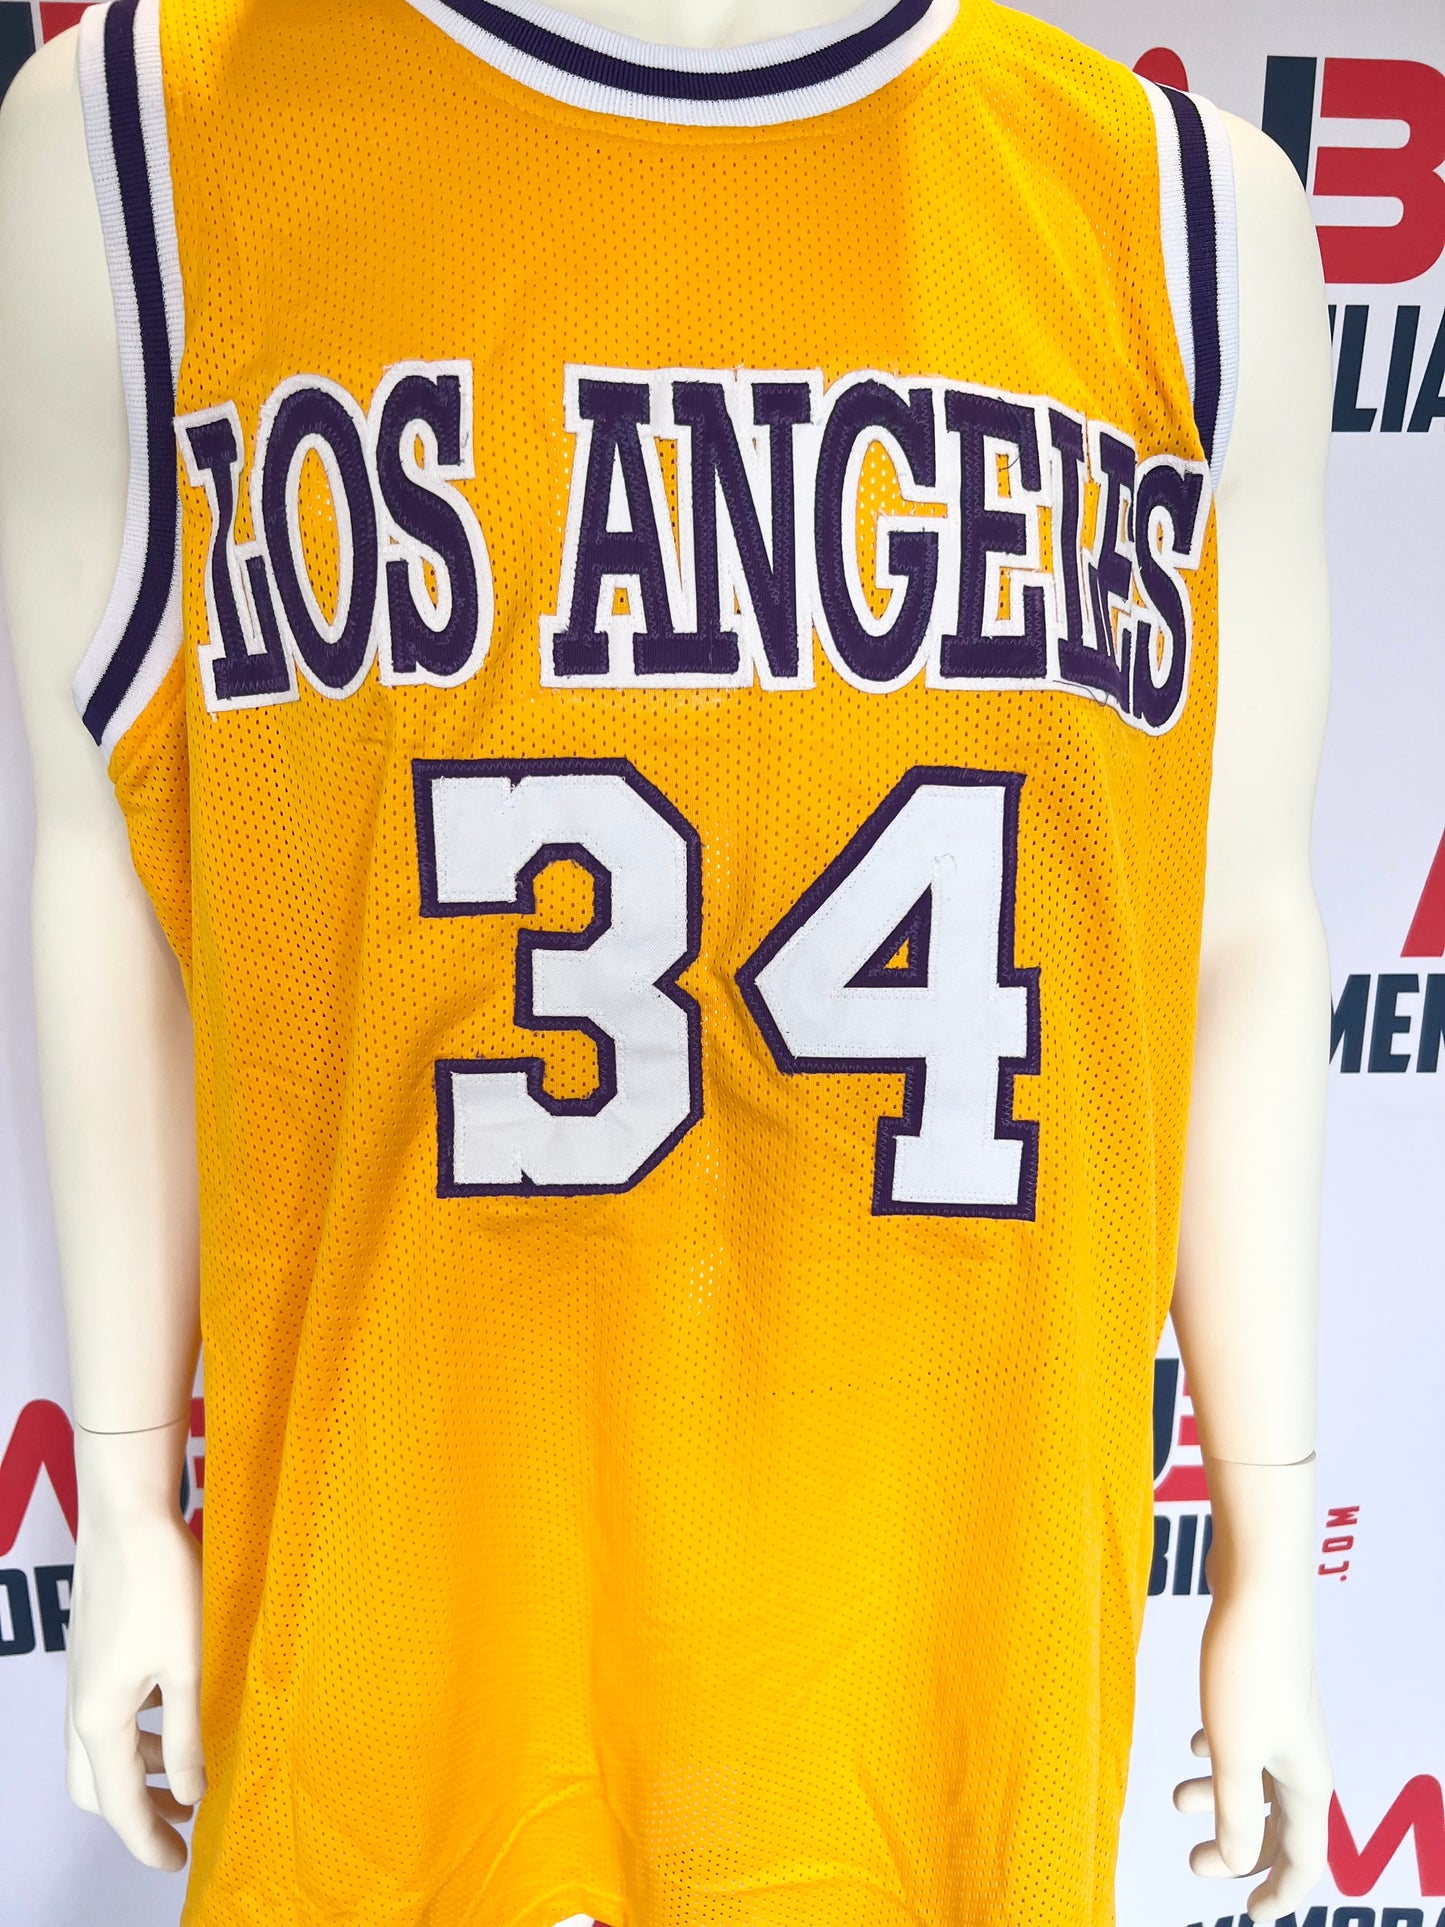 Shaq Signed Autographed La Lakers Jersey with Beckett Authentication